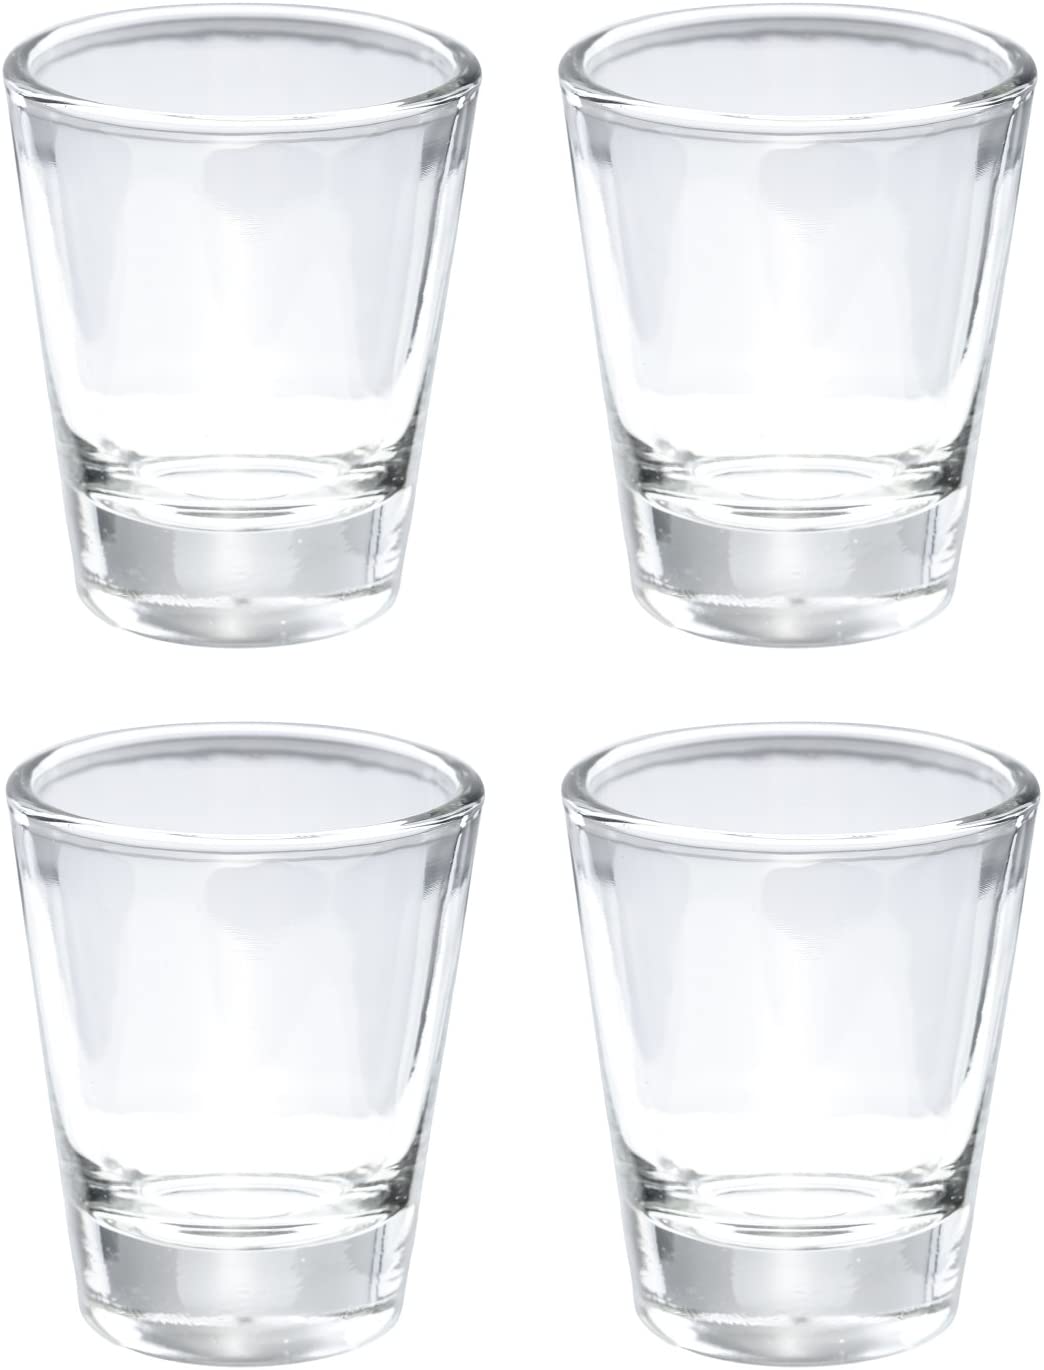 Liqueurs Tequila Square Shot Glasses Bulk Set of 12-2 oz Clear Tequila Shot Glasses with Heavy Base Whiskey Espresso Shots for Coffee